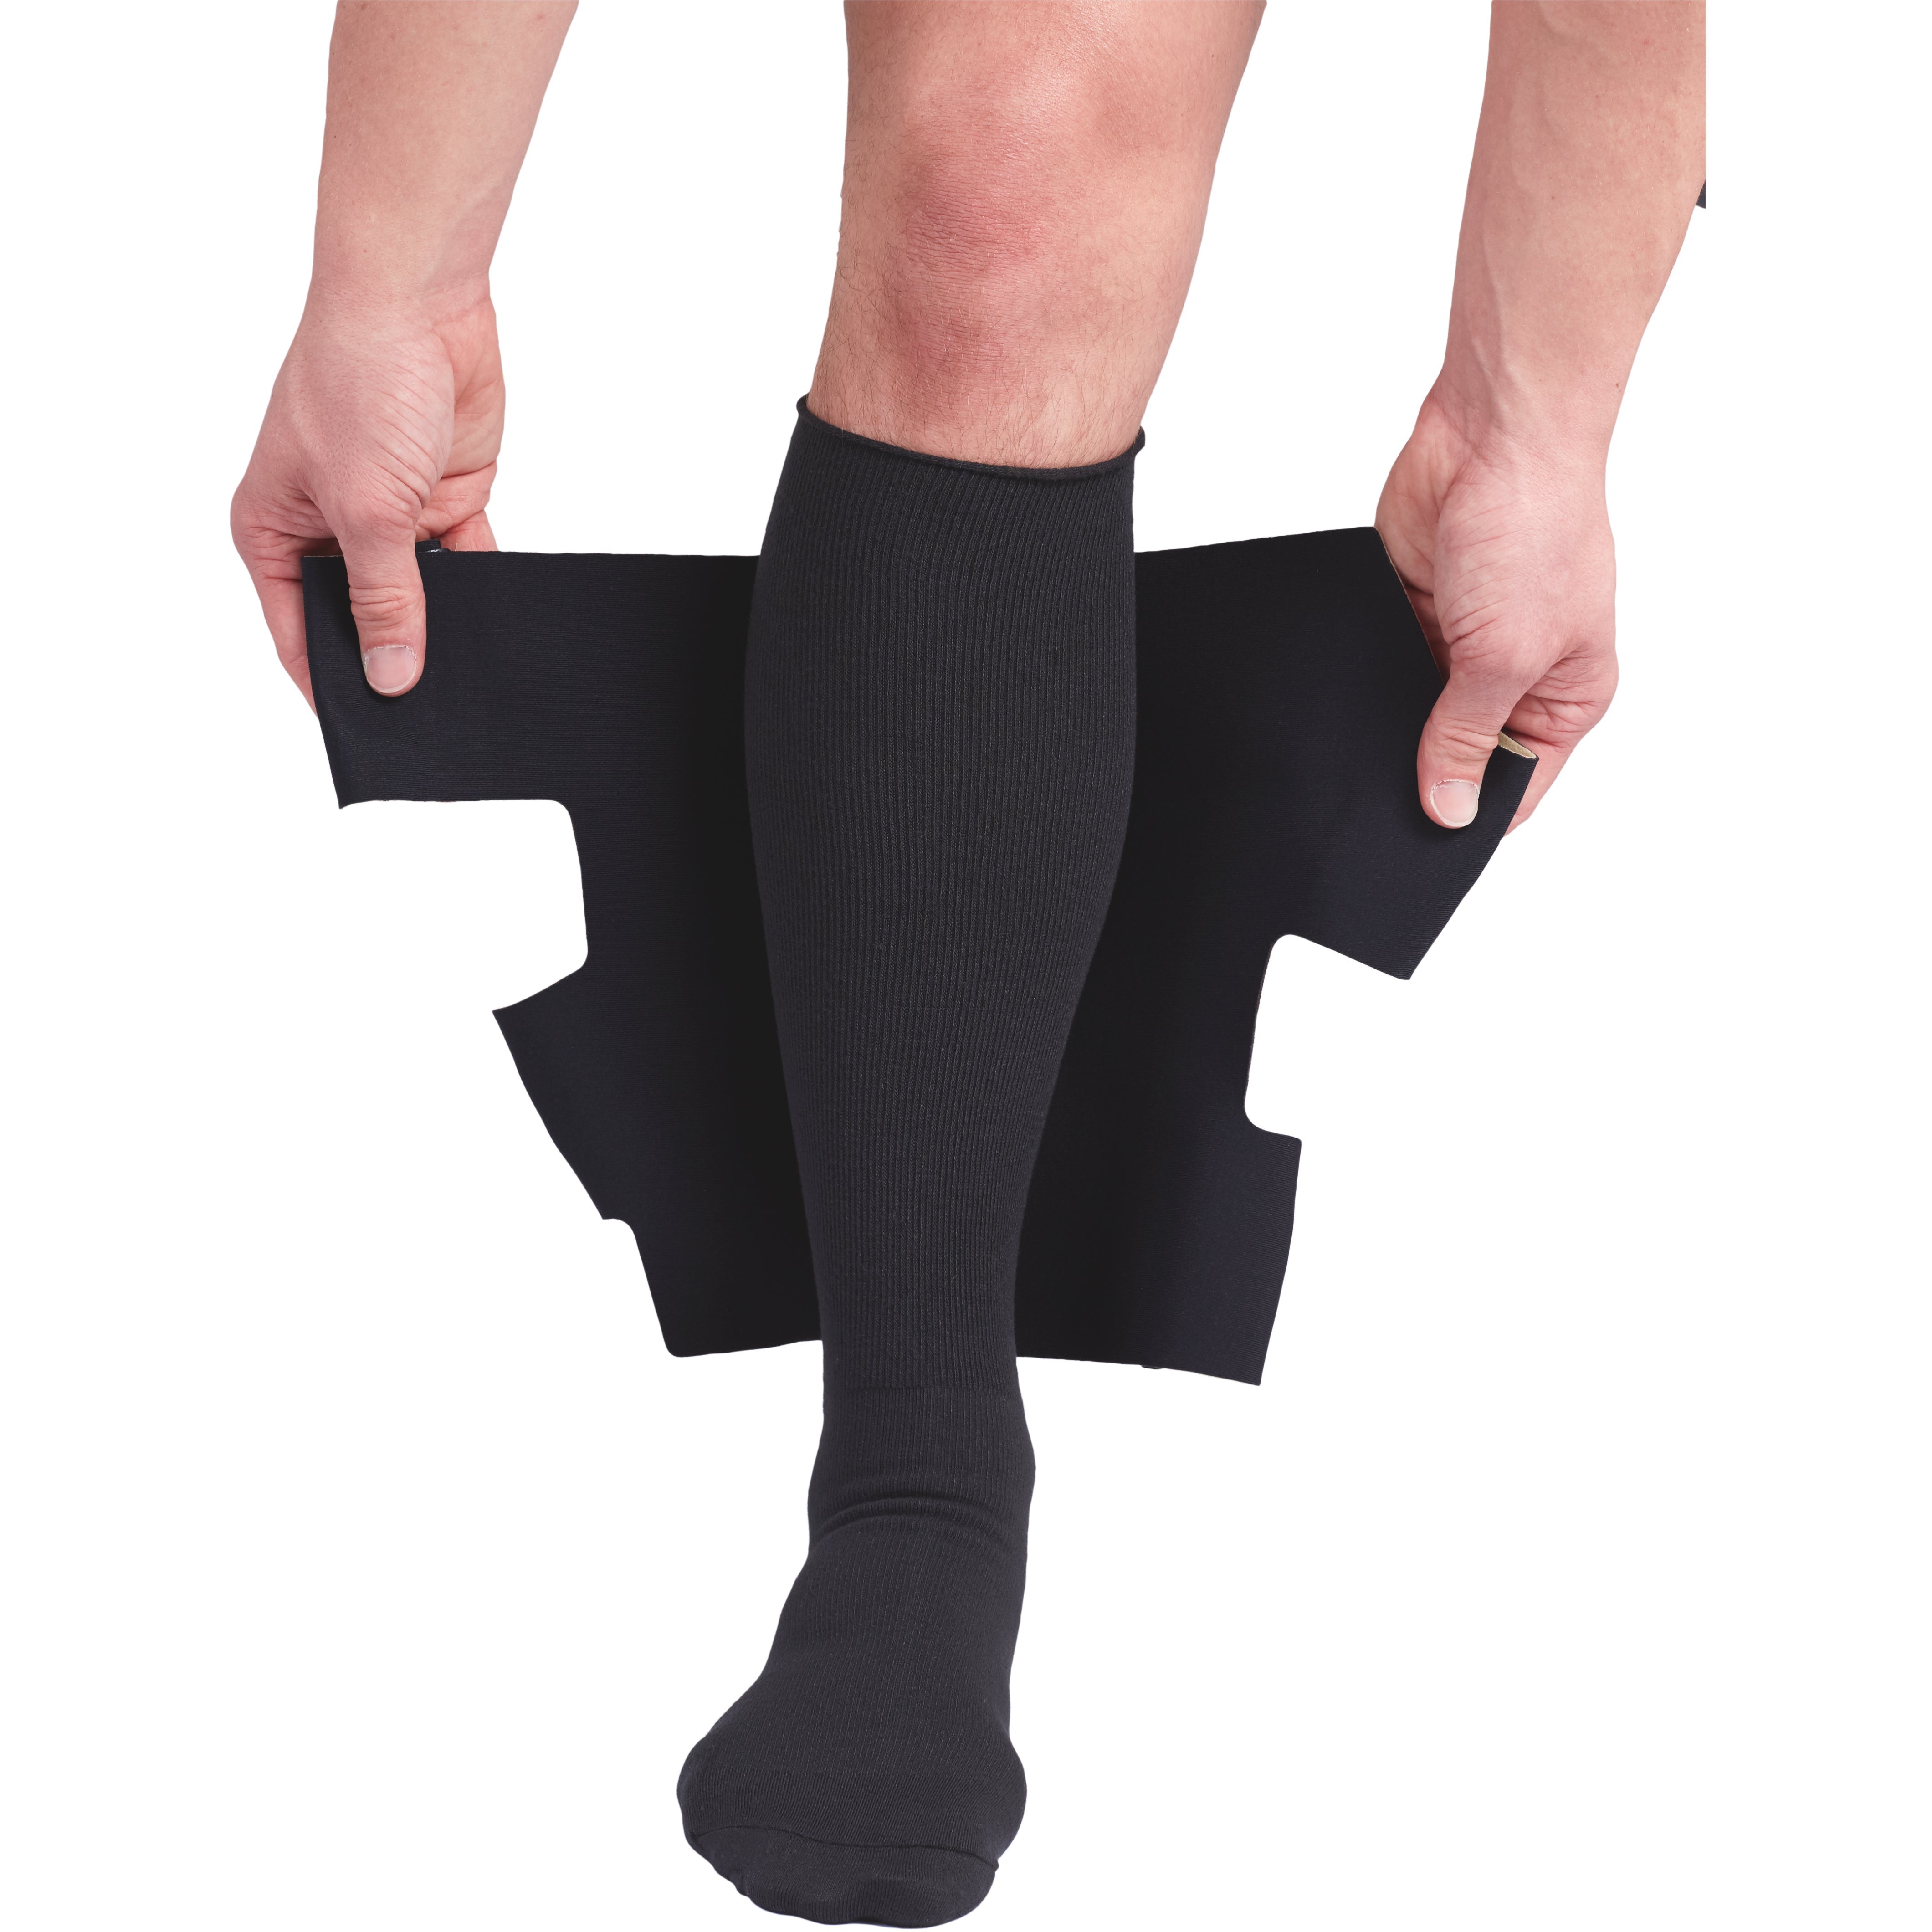 Single Leg Tights or One Leg Compression: Which is Correct? – LVLS